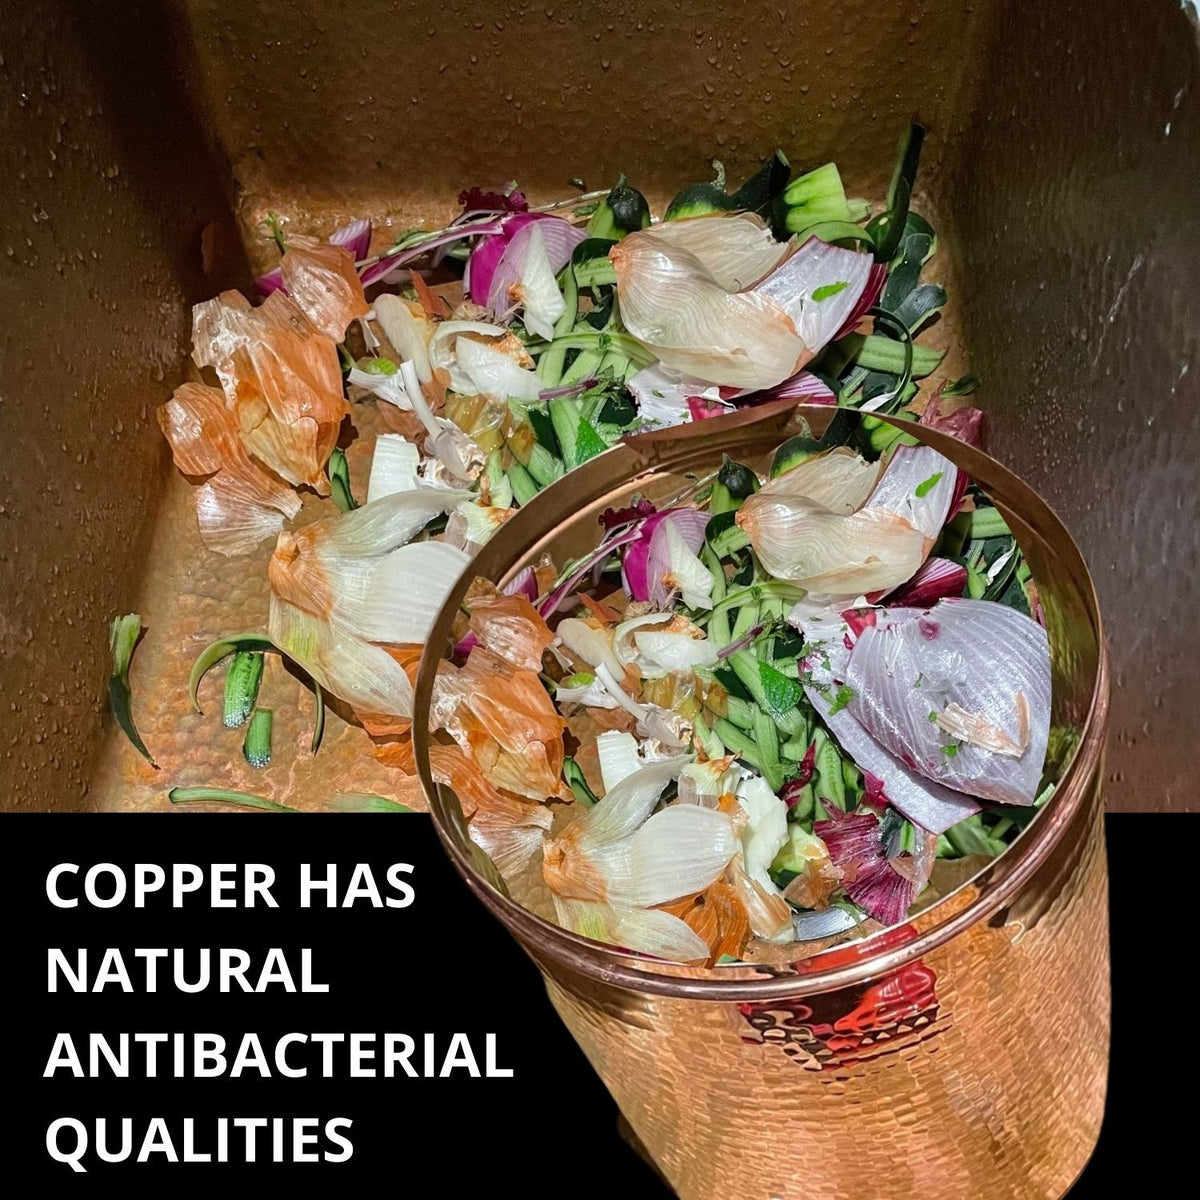 Copper Kitchen Compost Bin is anitmicrobial